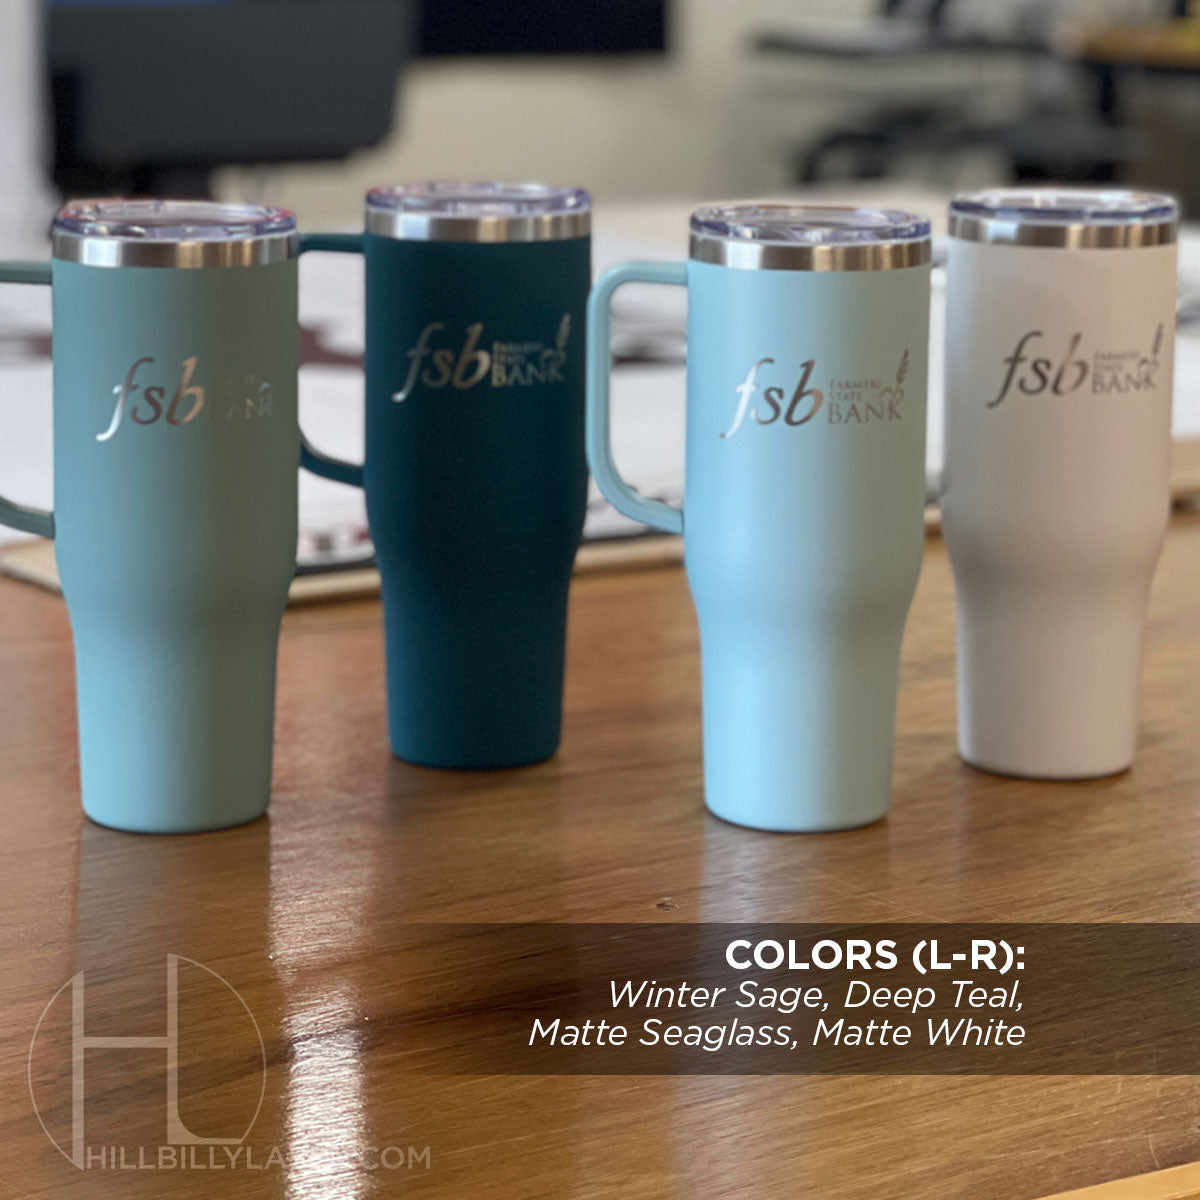 Personalized Laser Engraved 40 Oz Charger Tumbler With Handle Maars Charger  Large Tumbler Tumbler With Handle Personalized Tumbler 